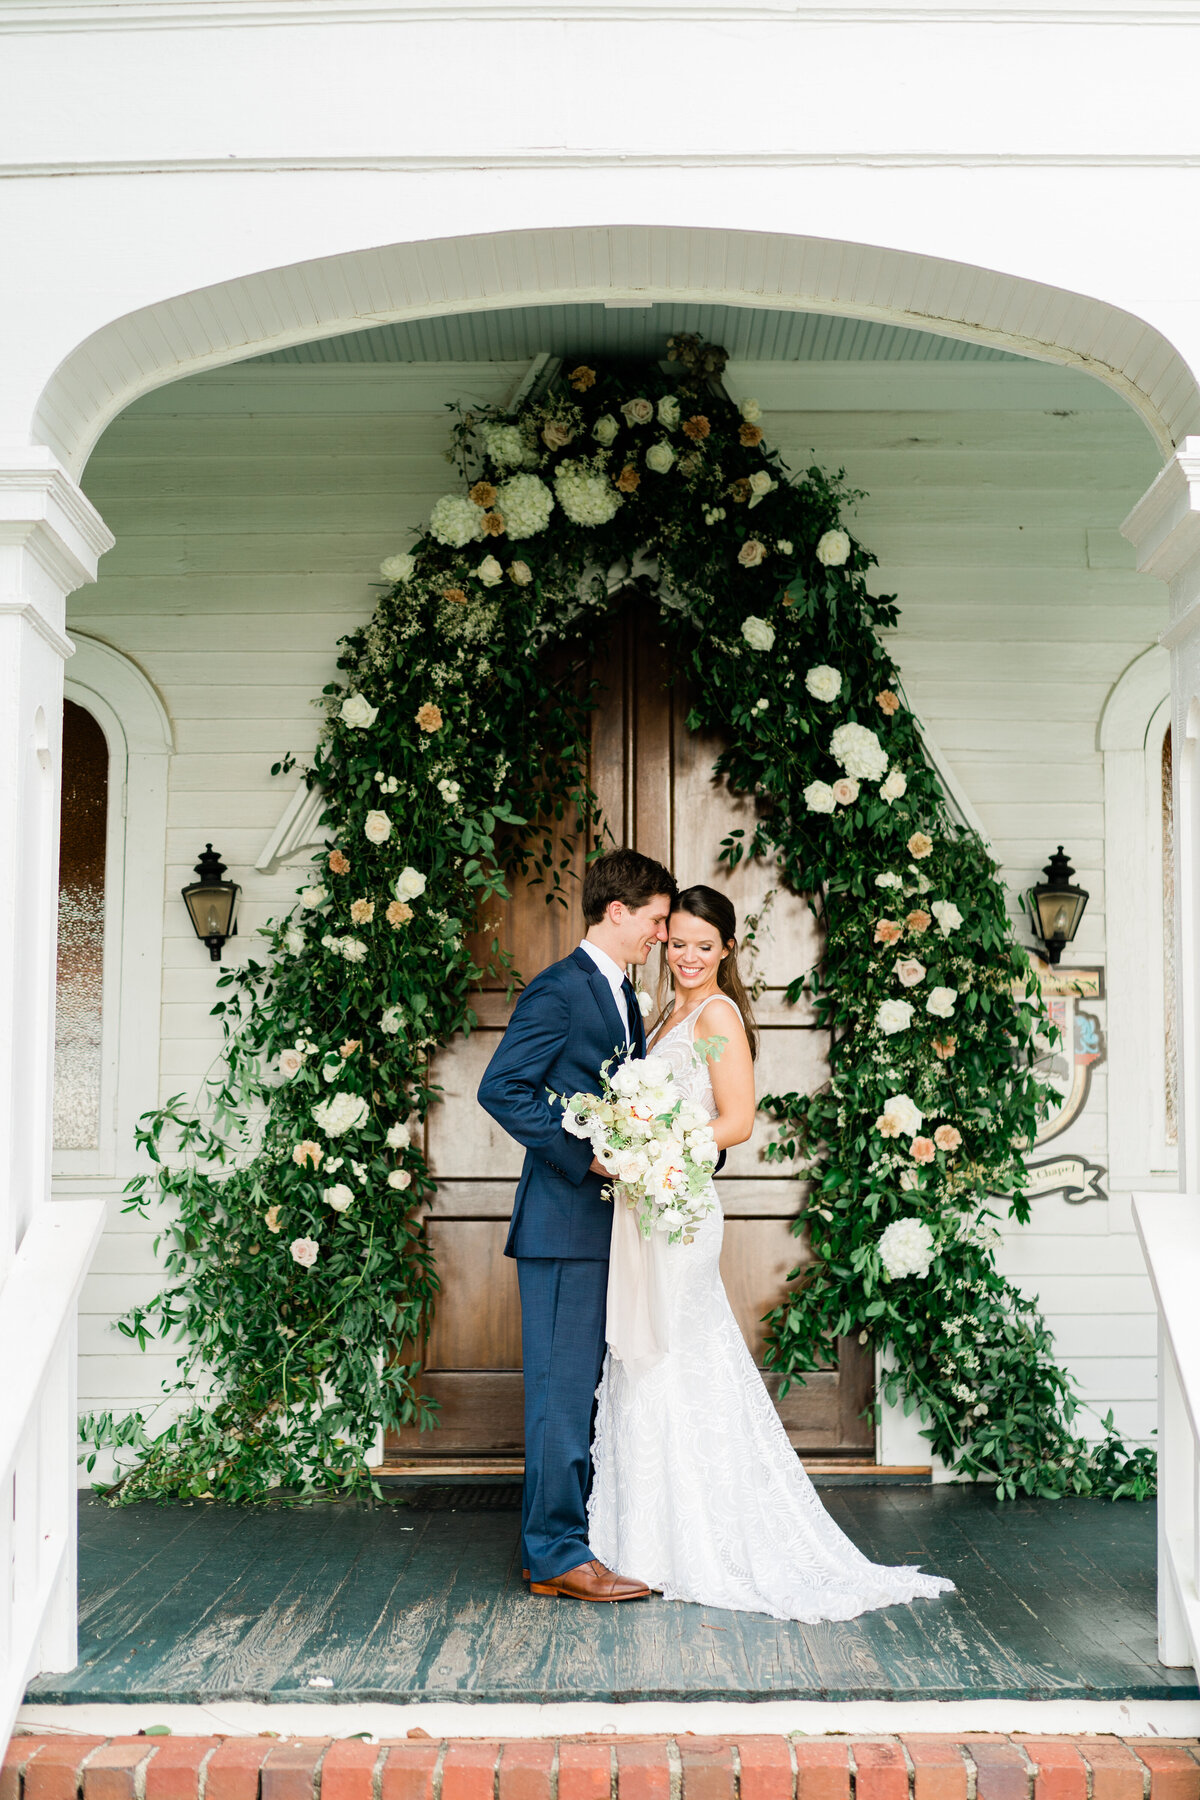 Bride and groom under archway made with greenery